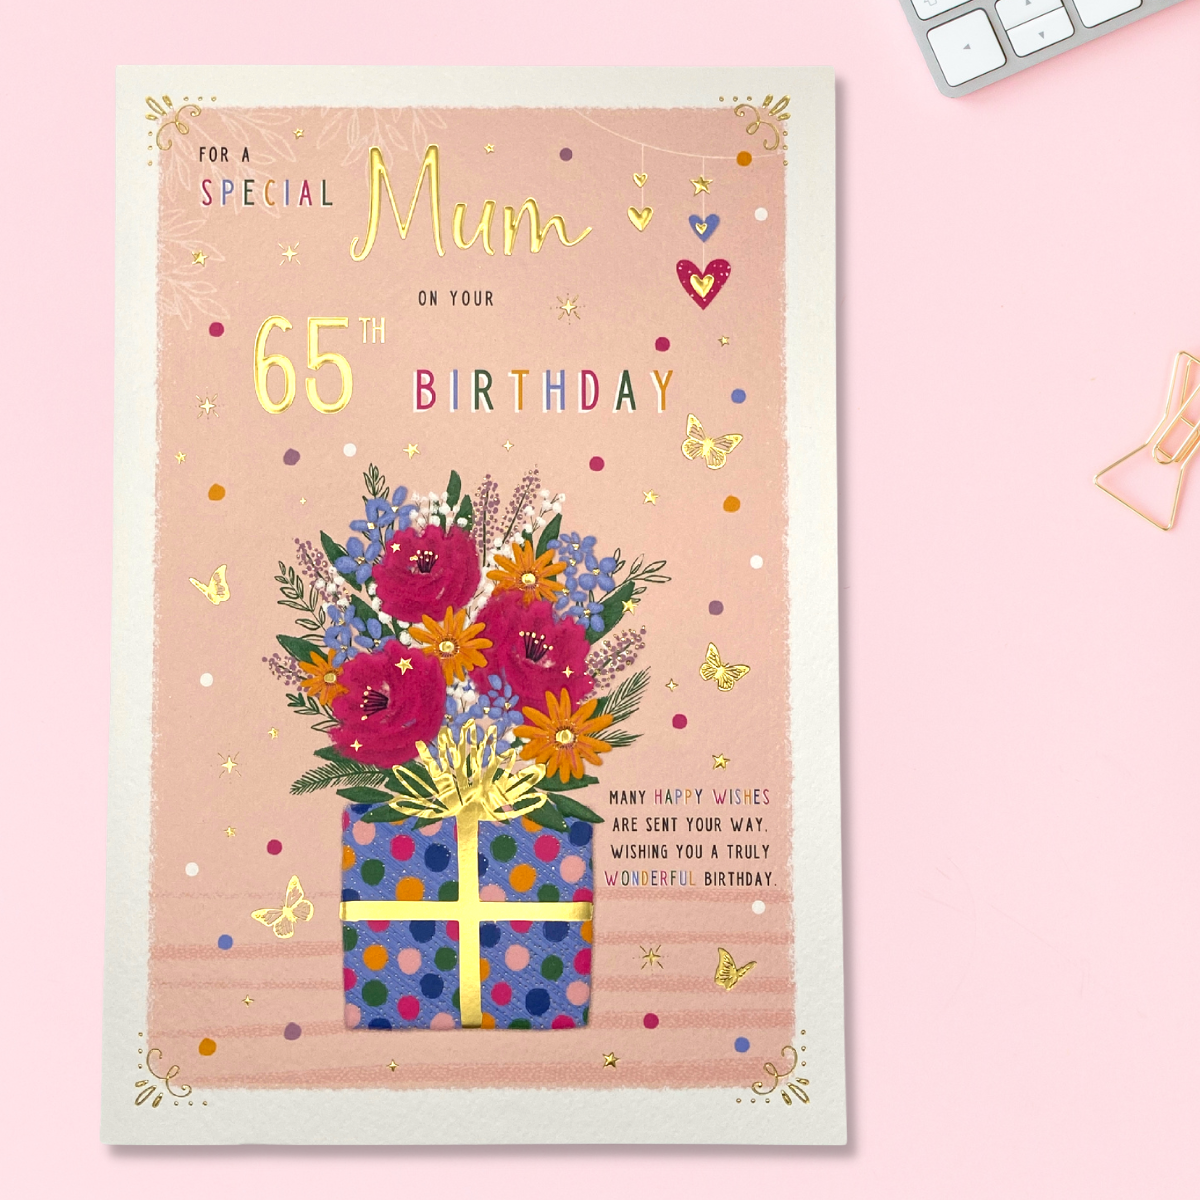 Image of Mum 65th card showing brightly coloured gift and flowers with gold butterflies